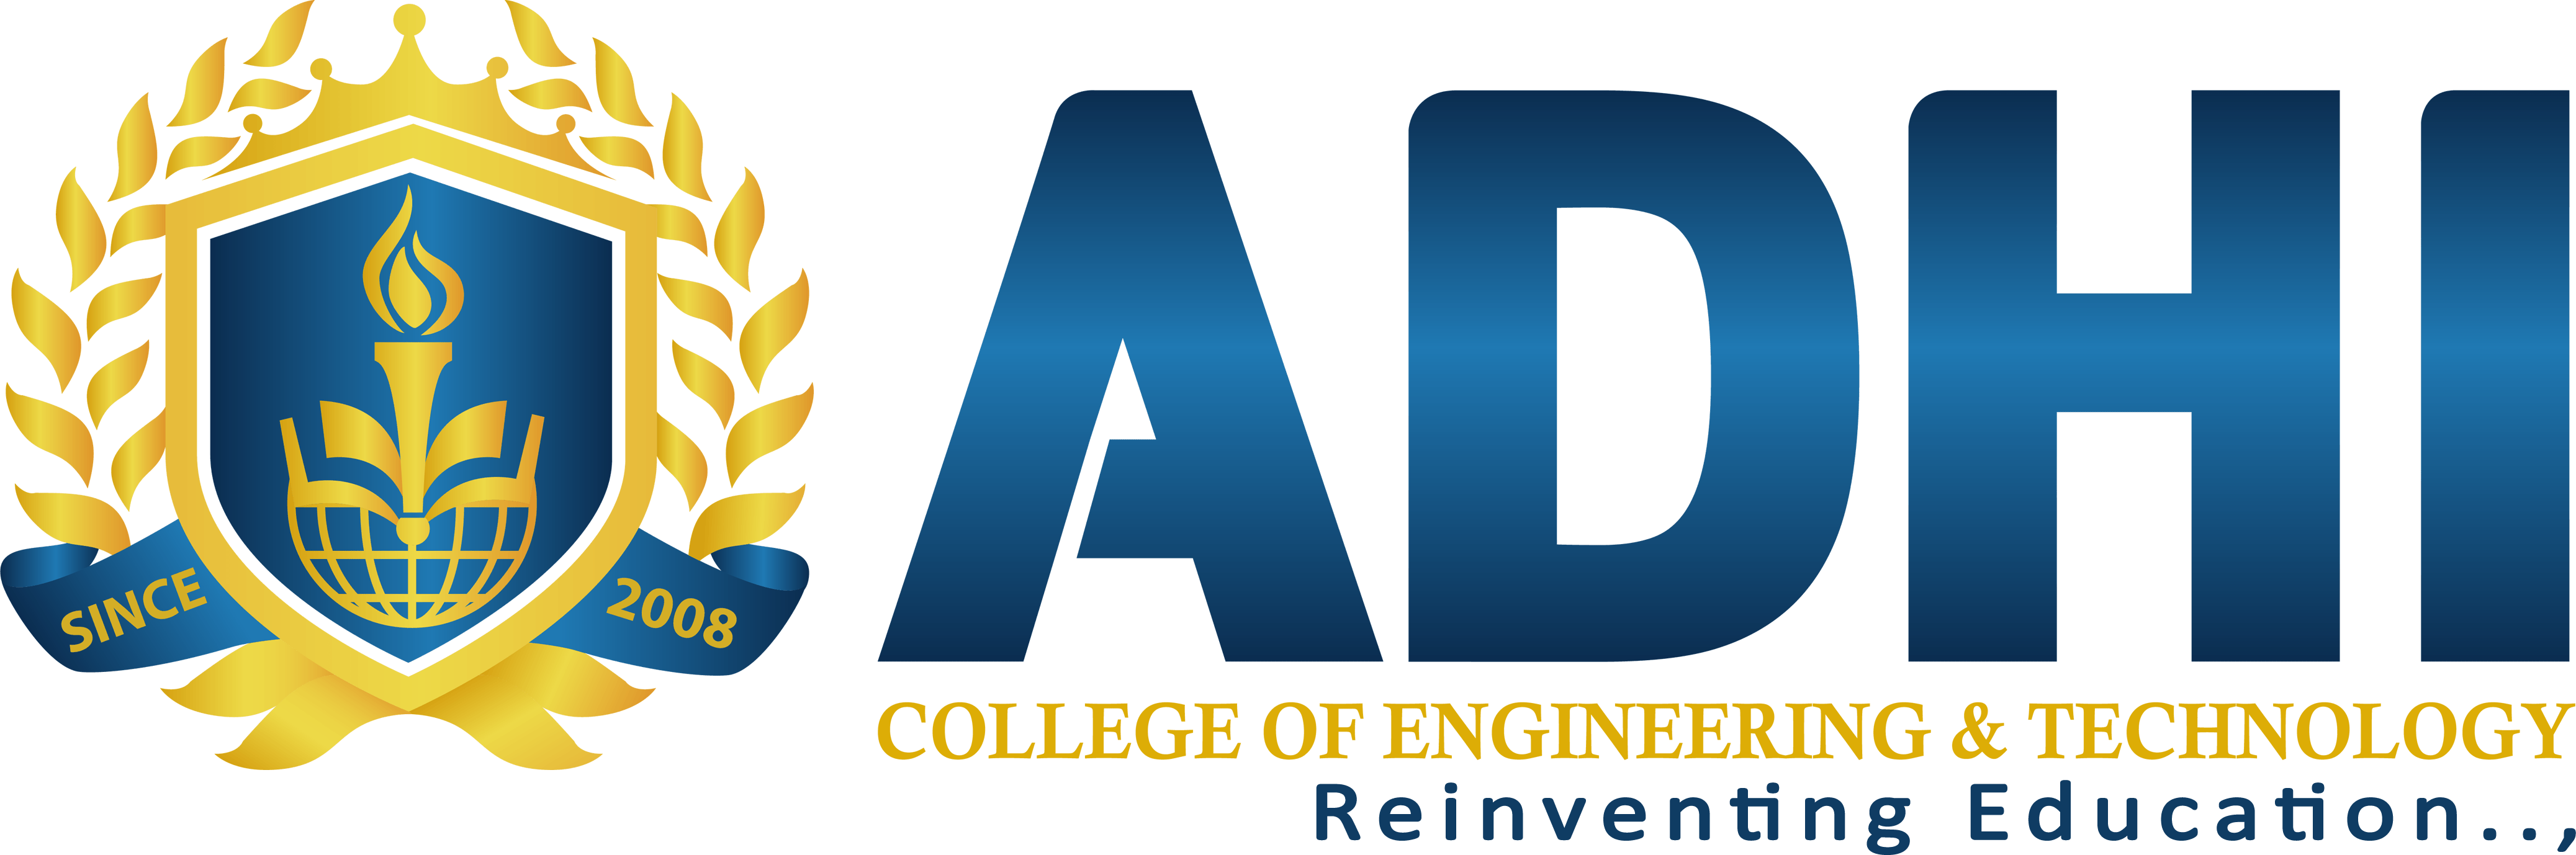 Blue Green College Logo - Adhi Engineering College logo.png